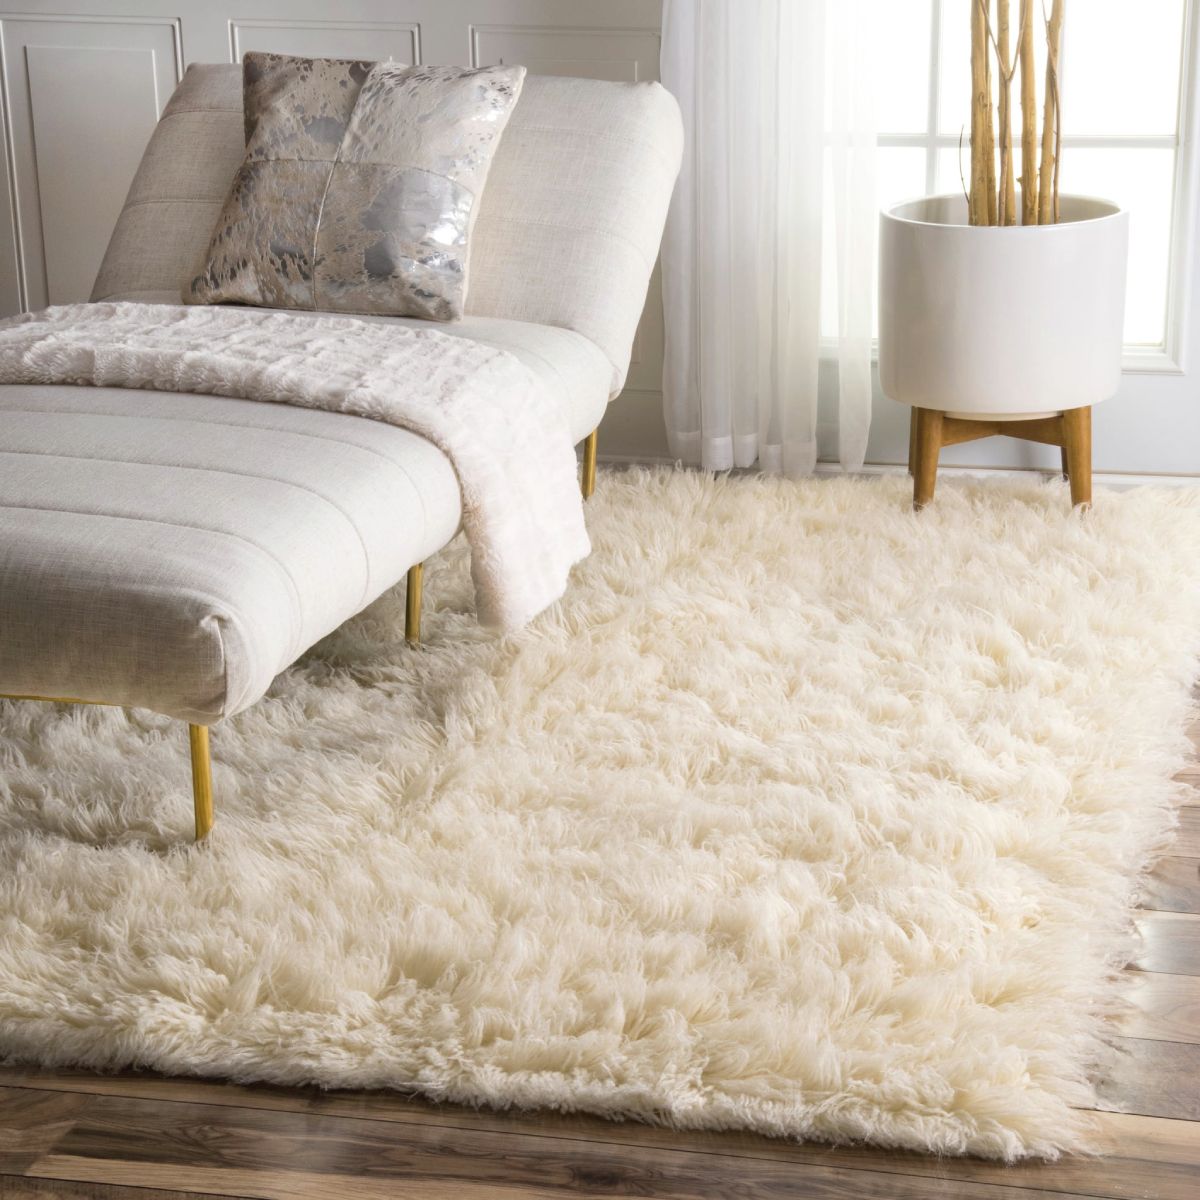 Whether you prefer carpet or rugs on wooden flooring, deciding on the right tone and texture is so important to creating a welcoming environment through the house. Higher pile heights create warm luxurious underfoot comfort. Choose a lighter tonal colour to compliment the space. For area rugs, quality and texture can really lift the space and furniture.